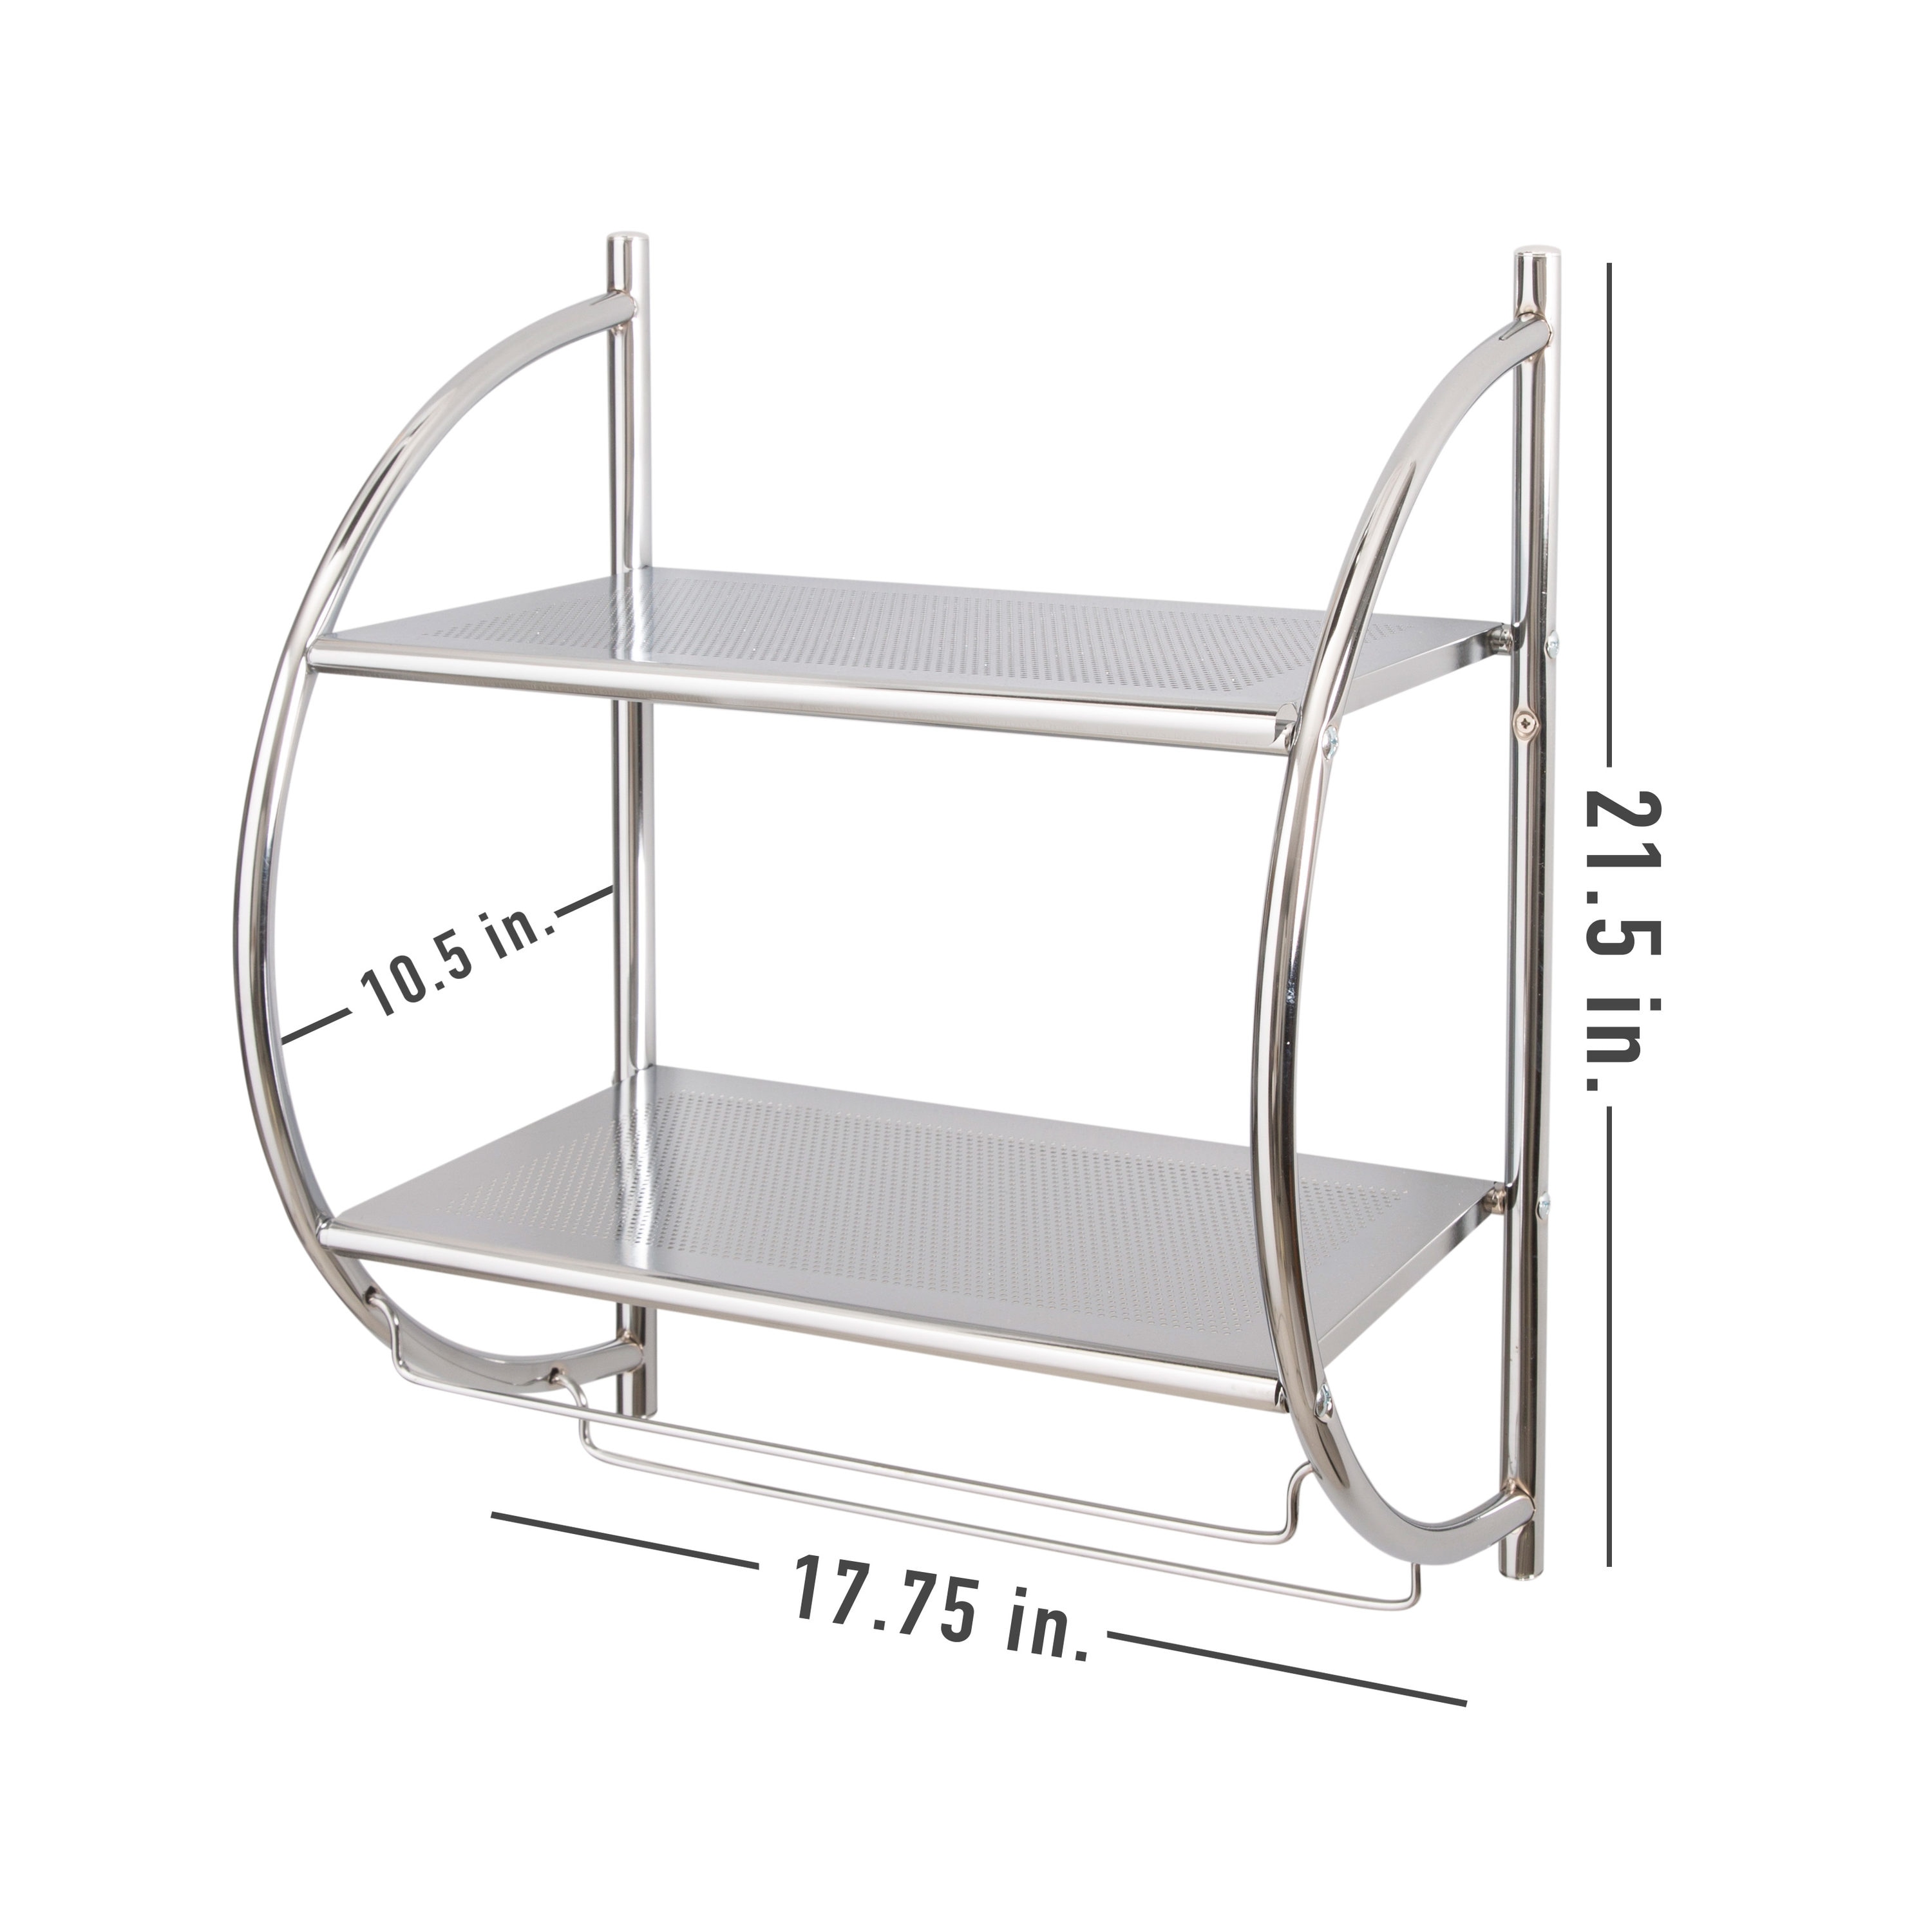 Stainless Steel Cooler Rack With 3 Shelves (CLR)